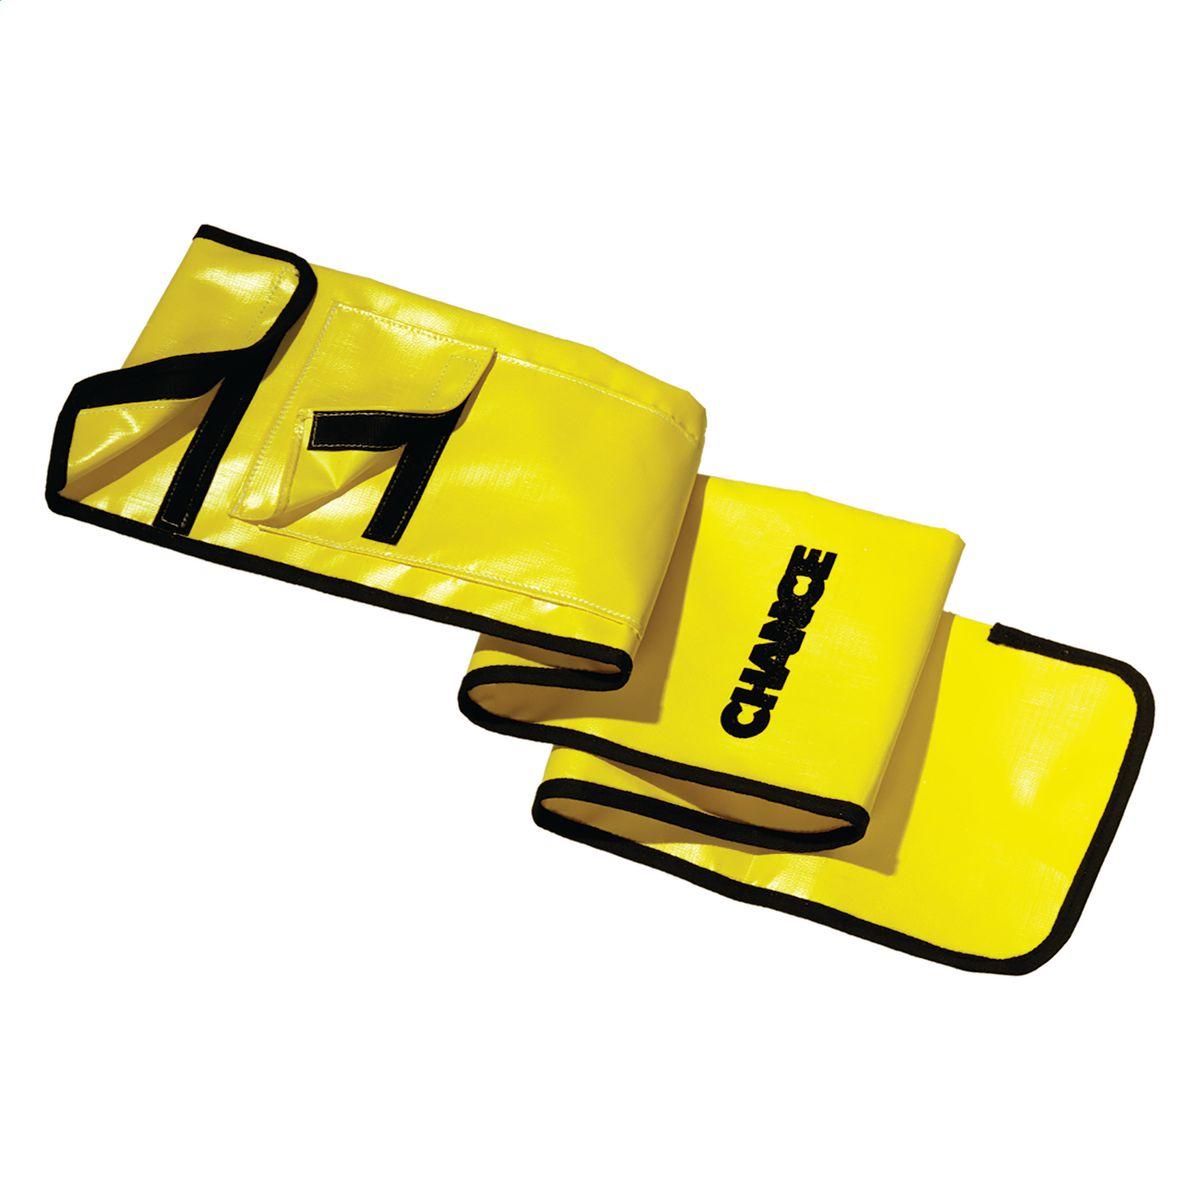 Hubbell P64314 TOOL BAG, 14'10"LG X 6.6" W, Chance waterproof storage bags help guard against contaminants and abrasion to help maintain the insulating properties of hotline tools. Yellow heavy-duty vinyl-impregnated fabric lasts for years of rugged service. Snaps, Velc